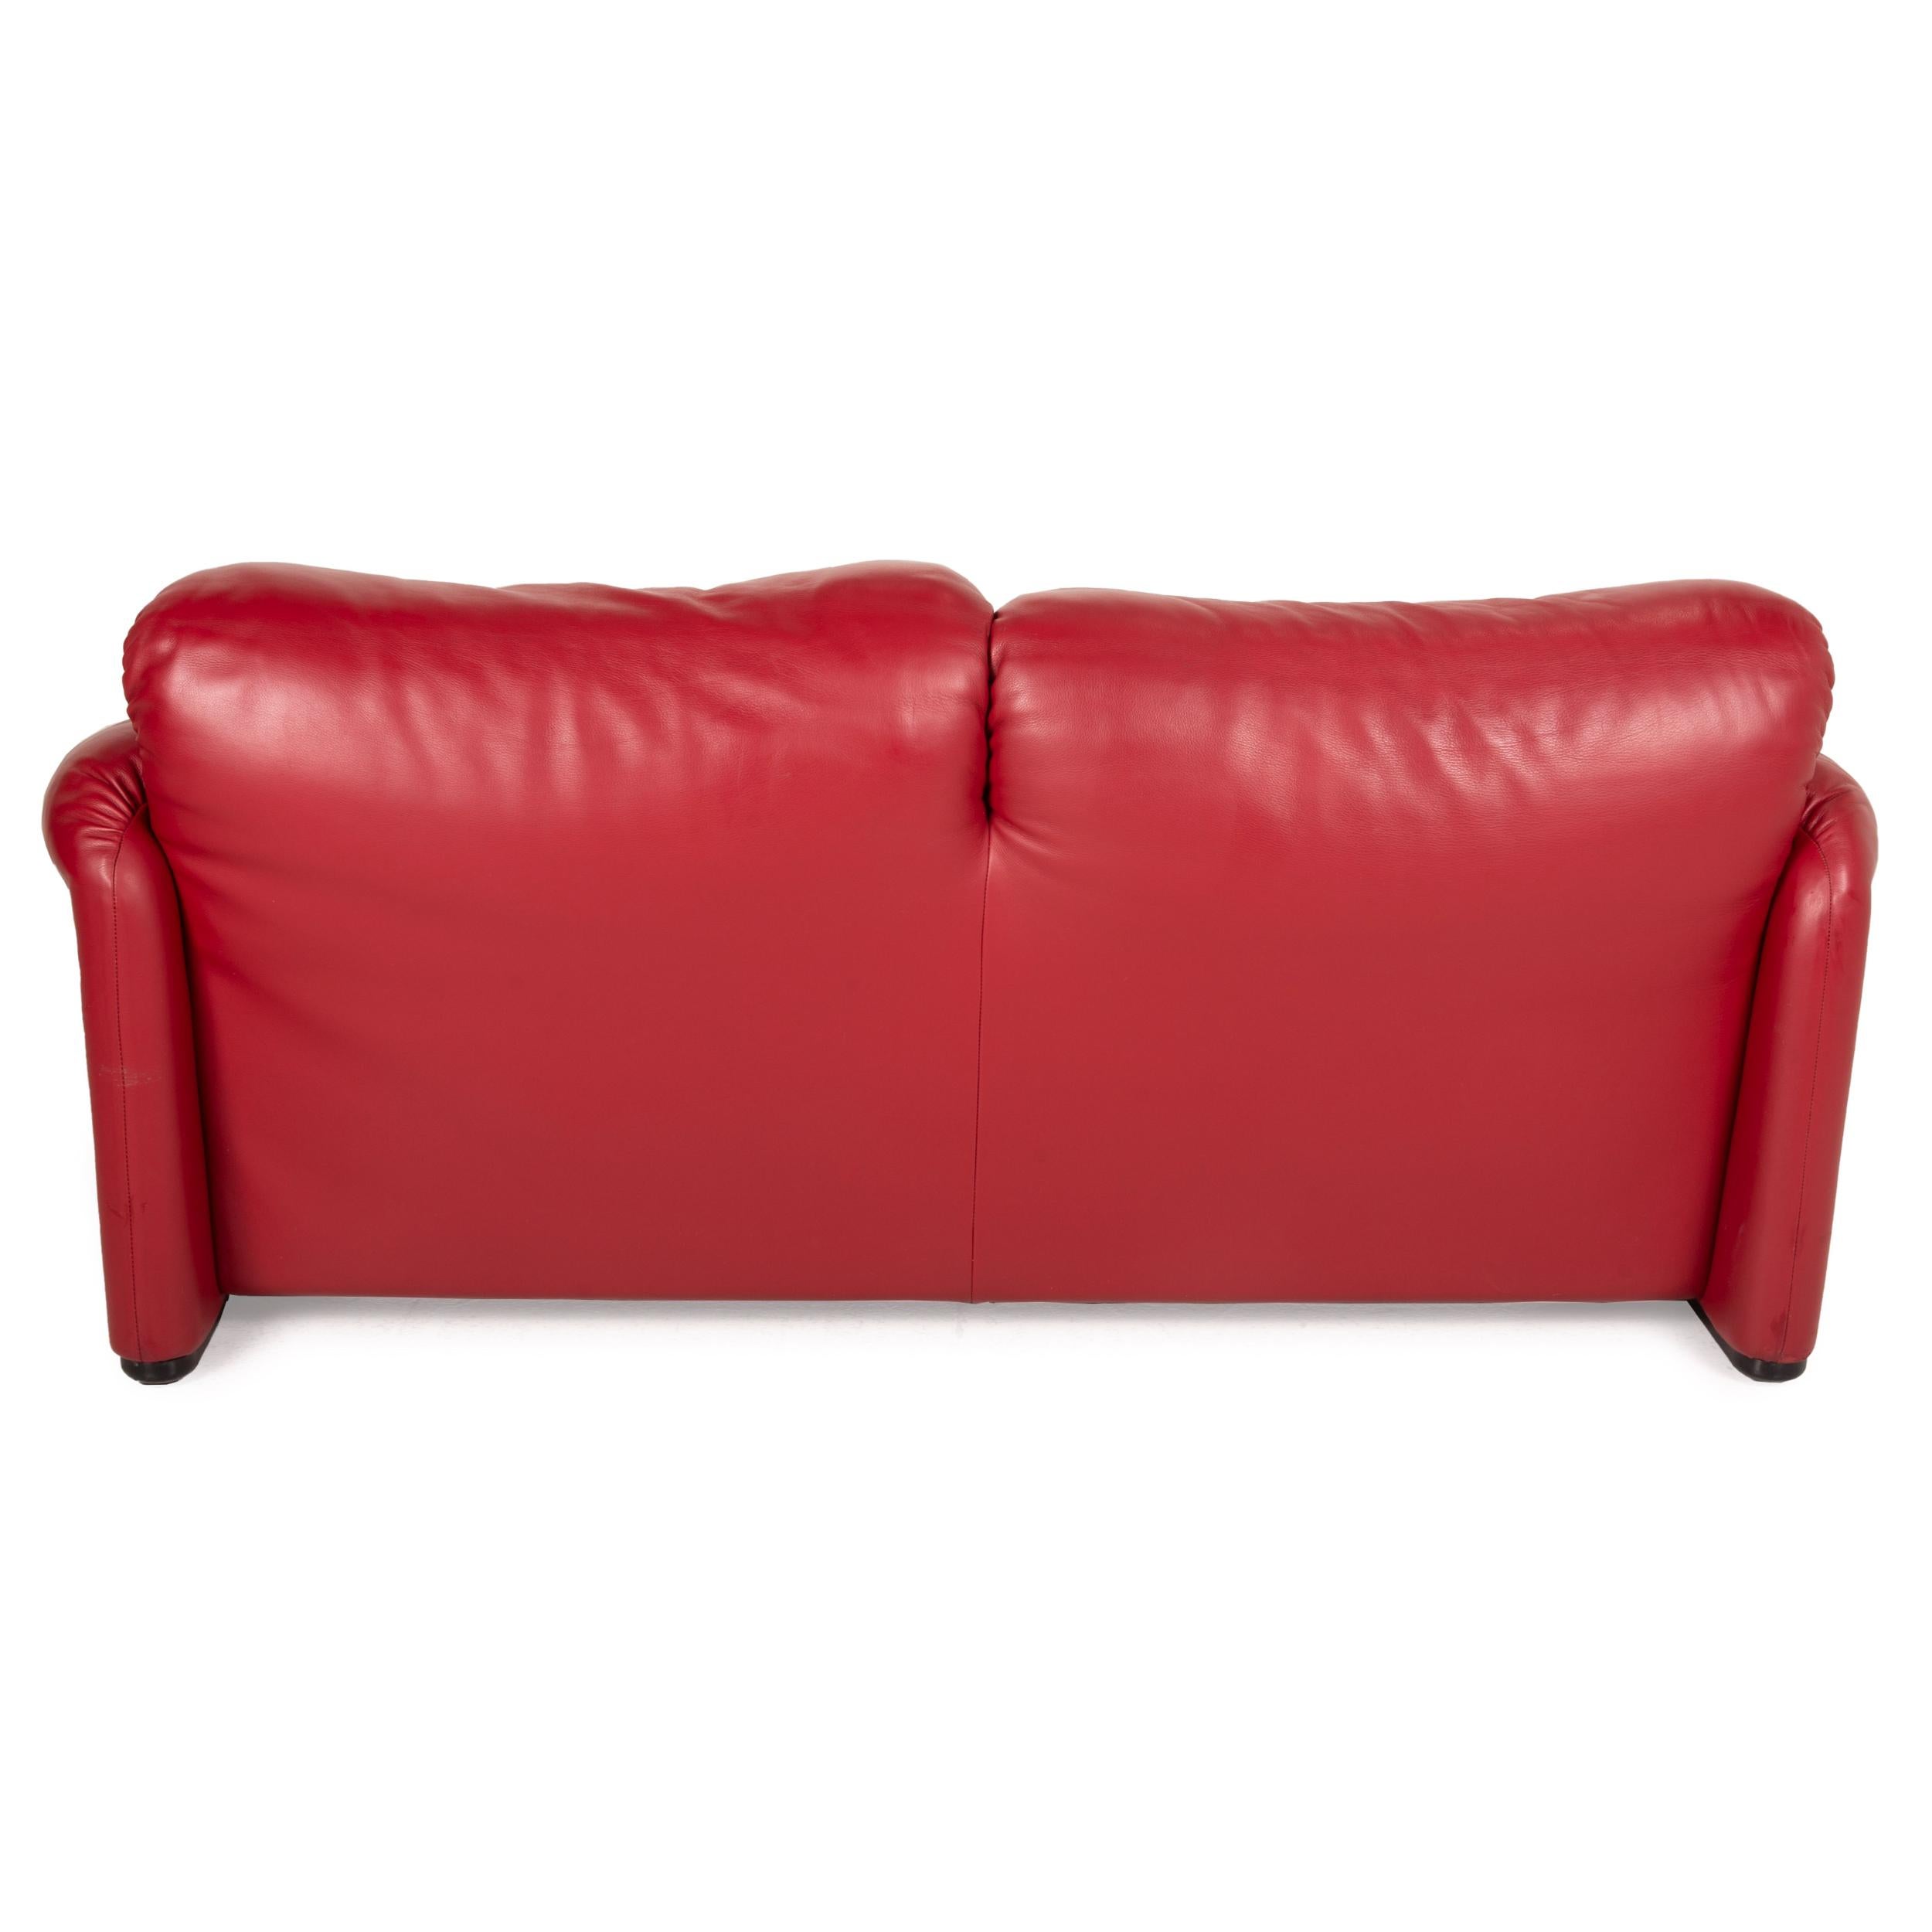 Cassina Maralunga Designer Leather Sofa Red Two-Seater Couch Function 2